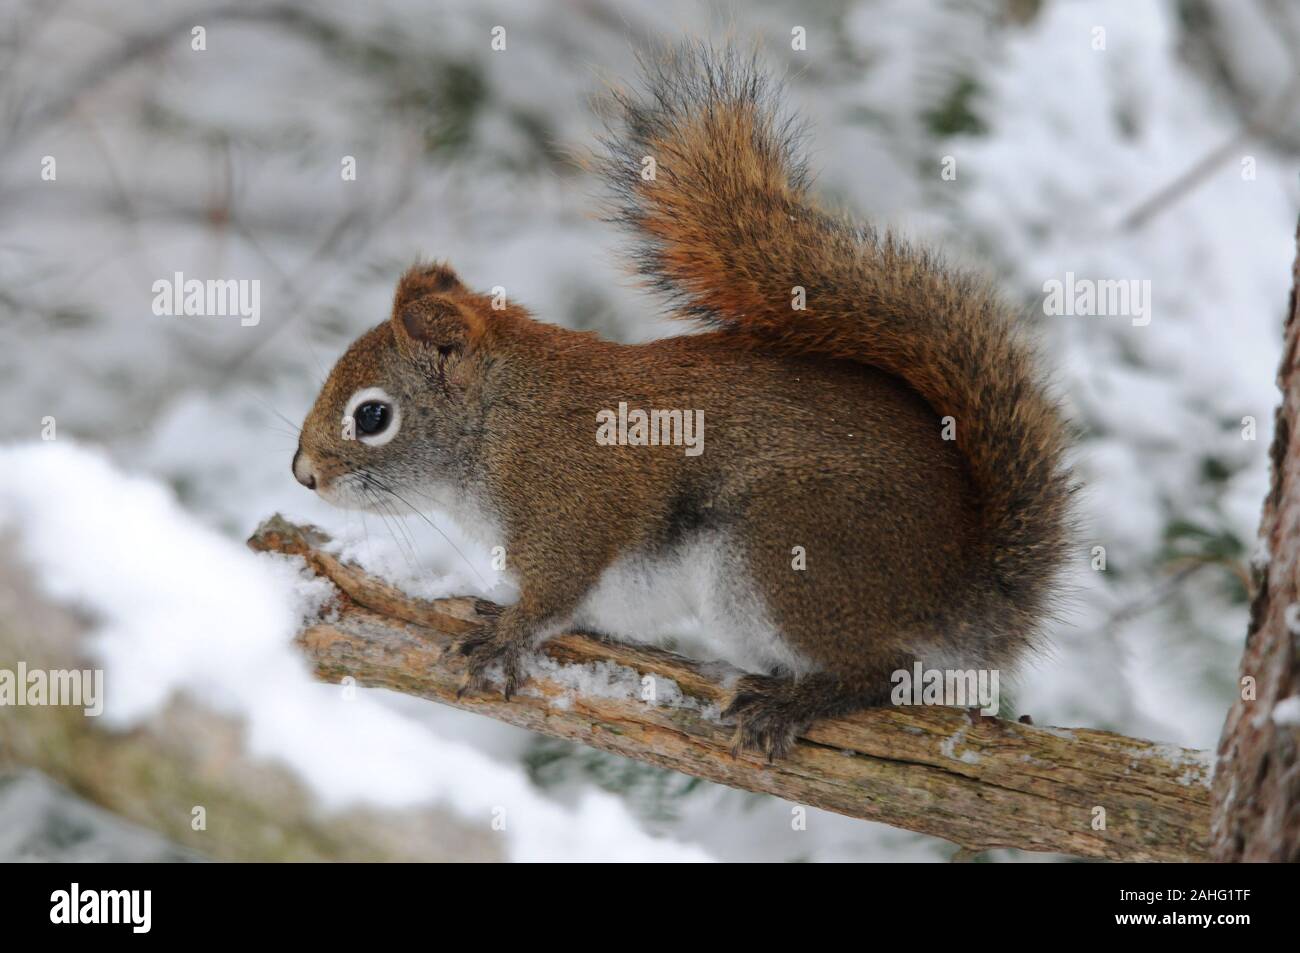 Squirrel animal in the forest sitting on a branch with snow with bokeh background displaying its brown fur, head, eyes, nose, ears, paws, bushy tail, Stock Photo